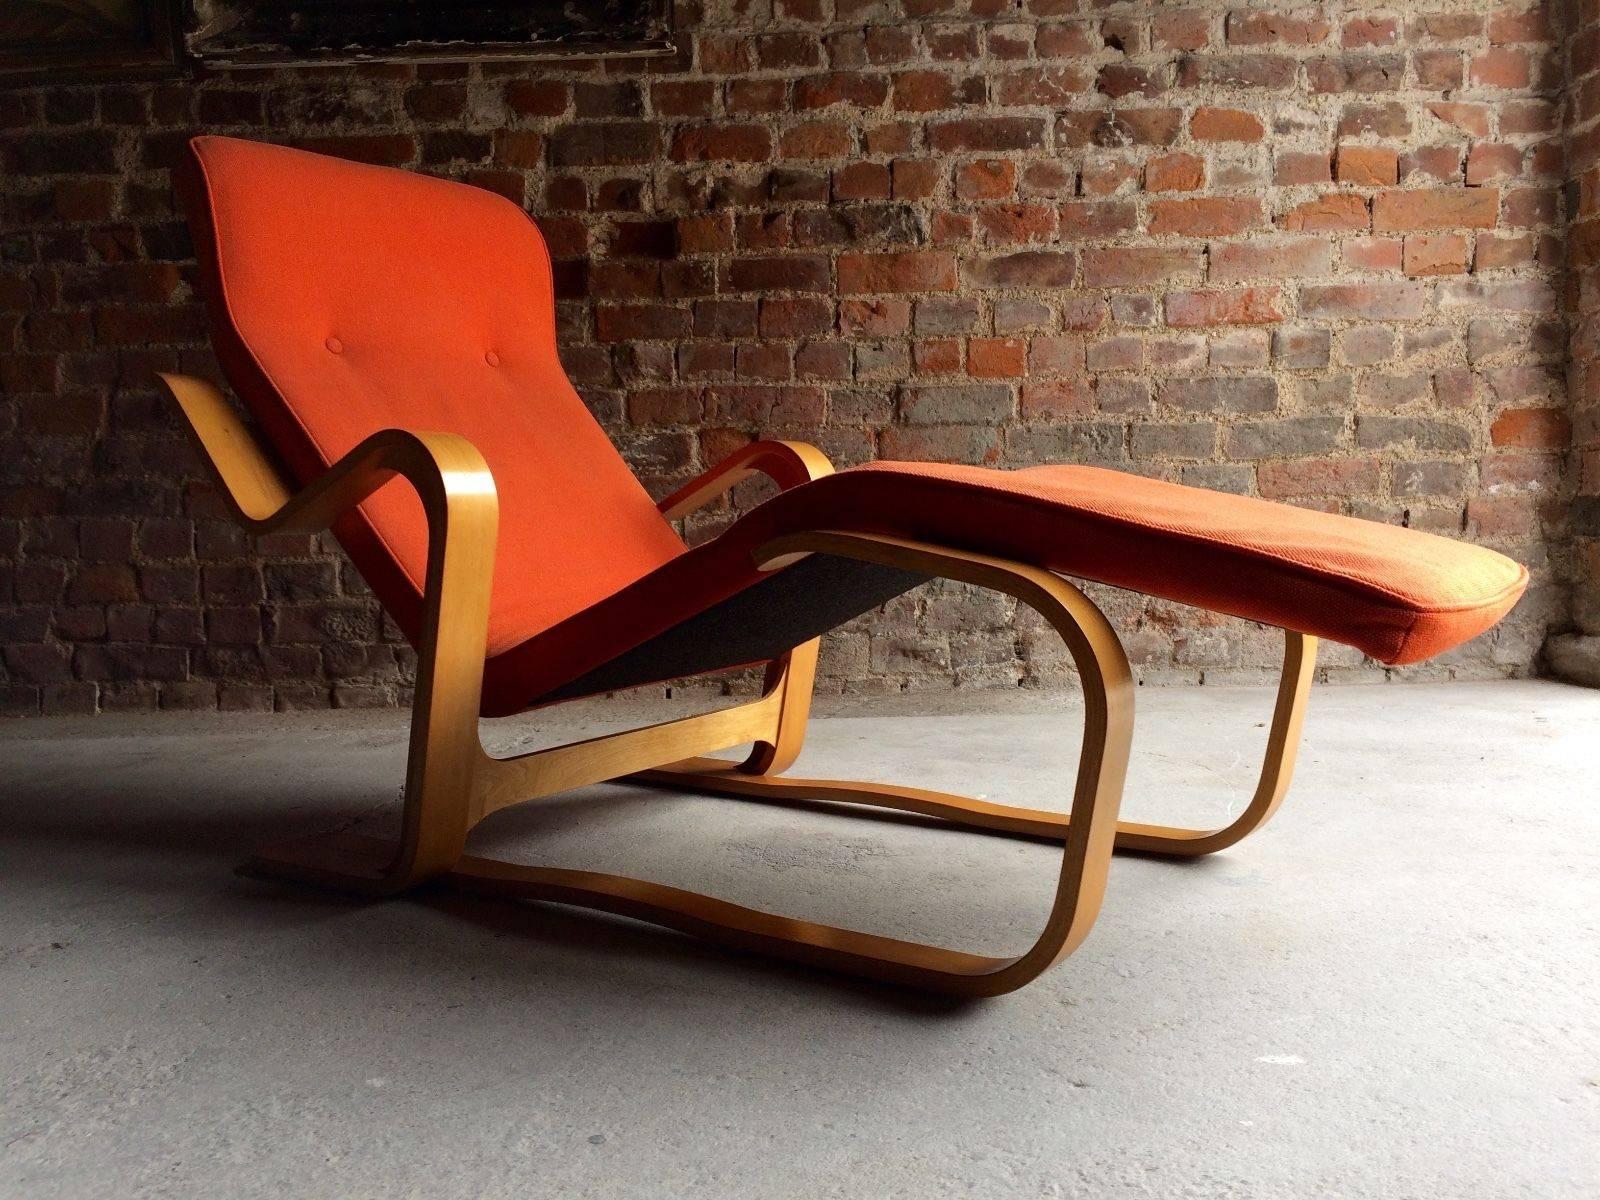 Mid-Century Marcel Breuer bent ply long chair, circa 1970.

A fabulous Marcel Breuer long chair (1902-1981) as featured in the Victoria and Albert Museum ((V&A) London, Marcel Breuer has been described as one of the most influential designers of